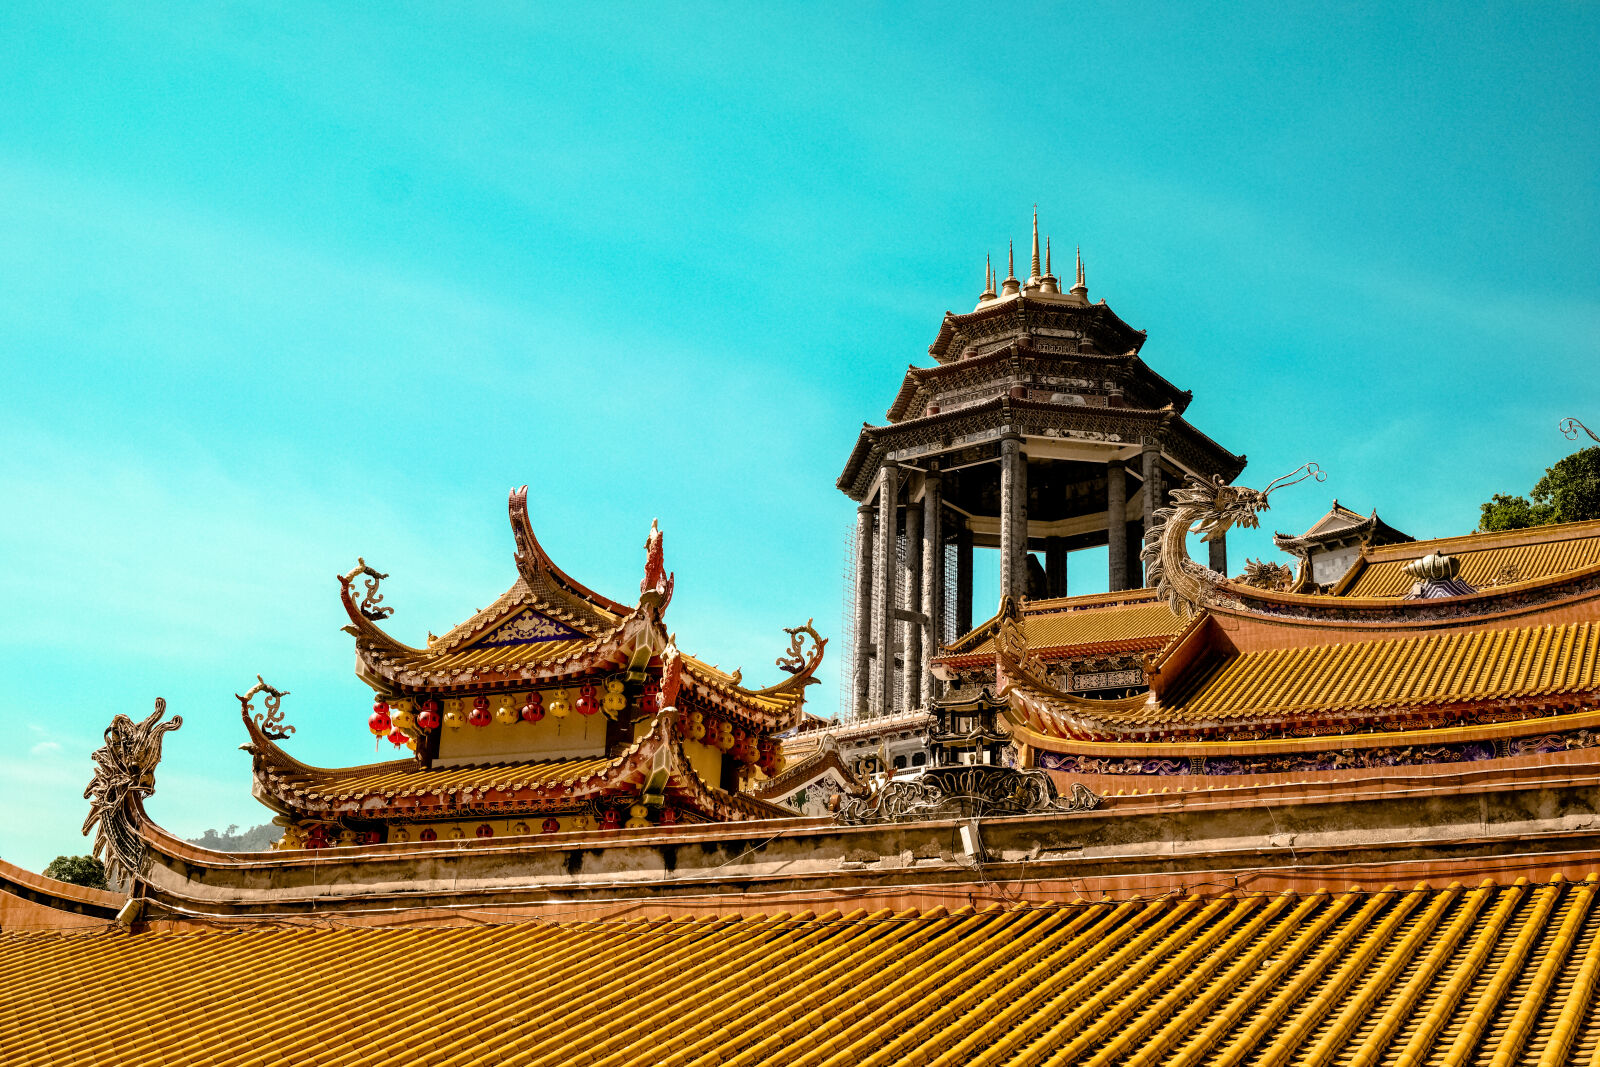 Samsung NX1 sample photo. Landscape, buildings, temple, chinese photography